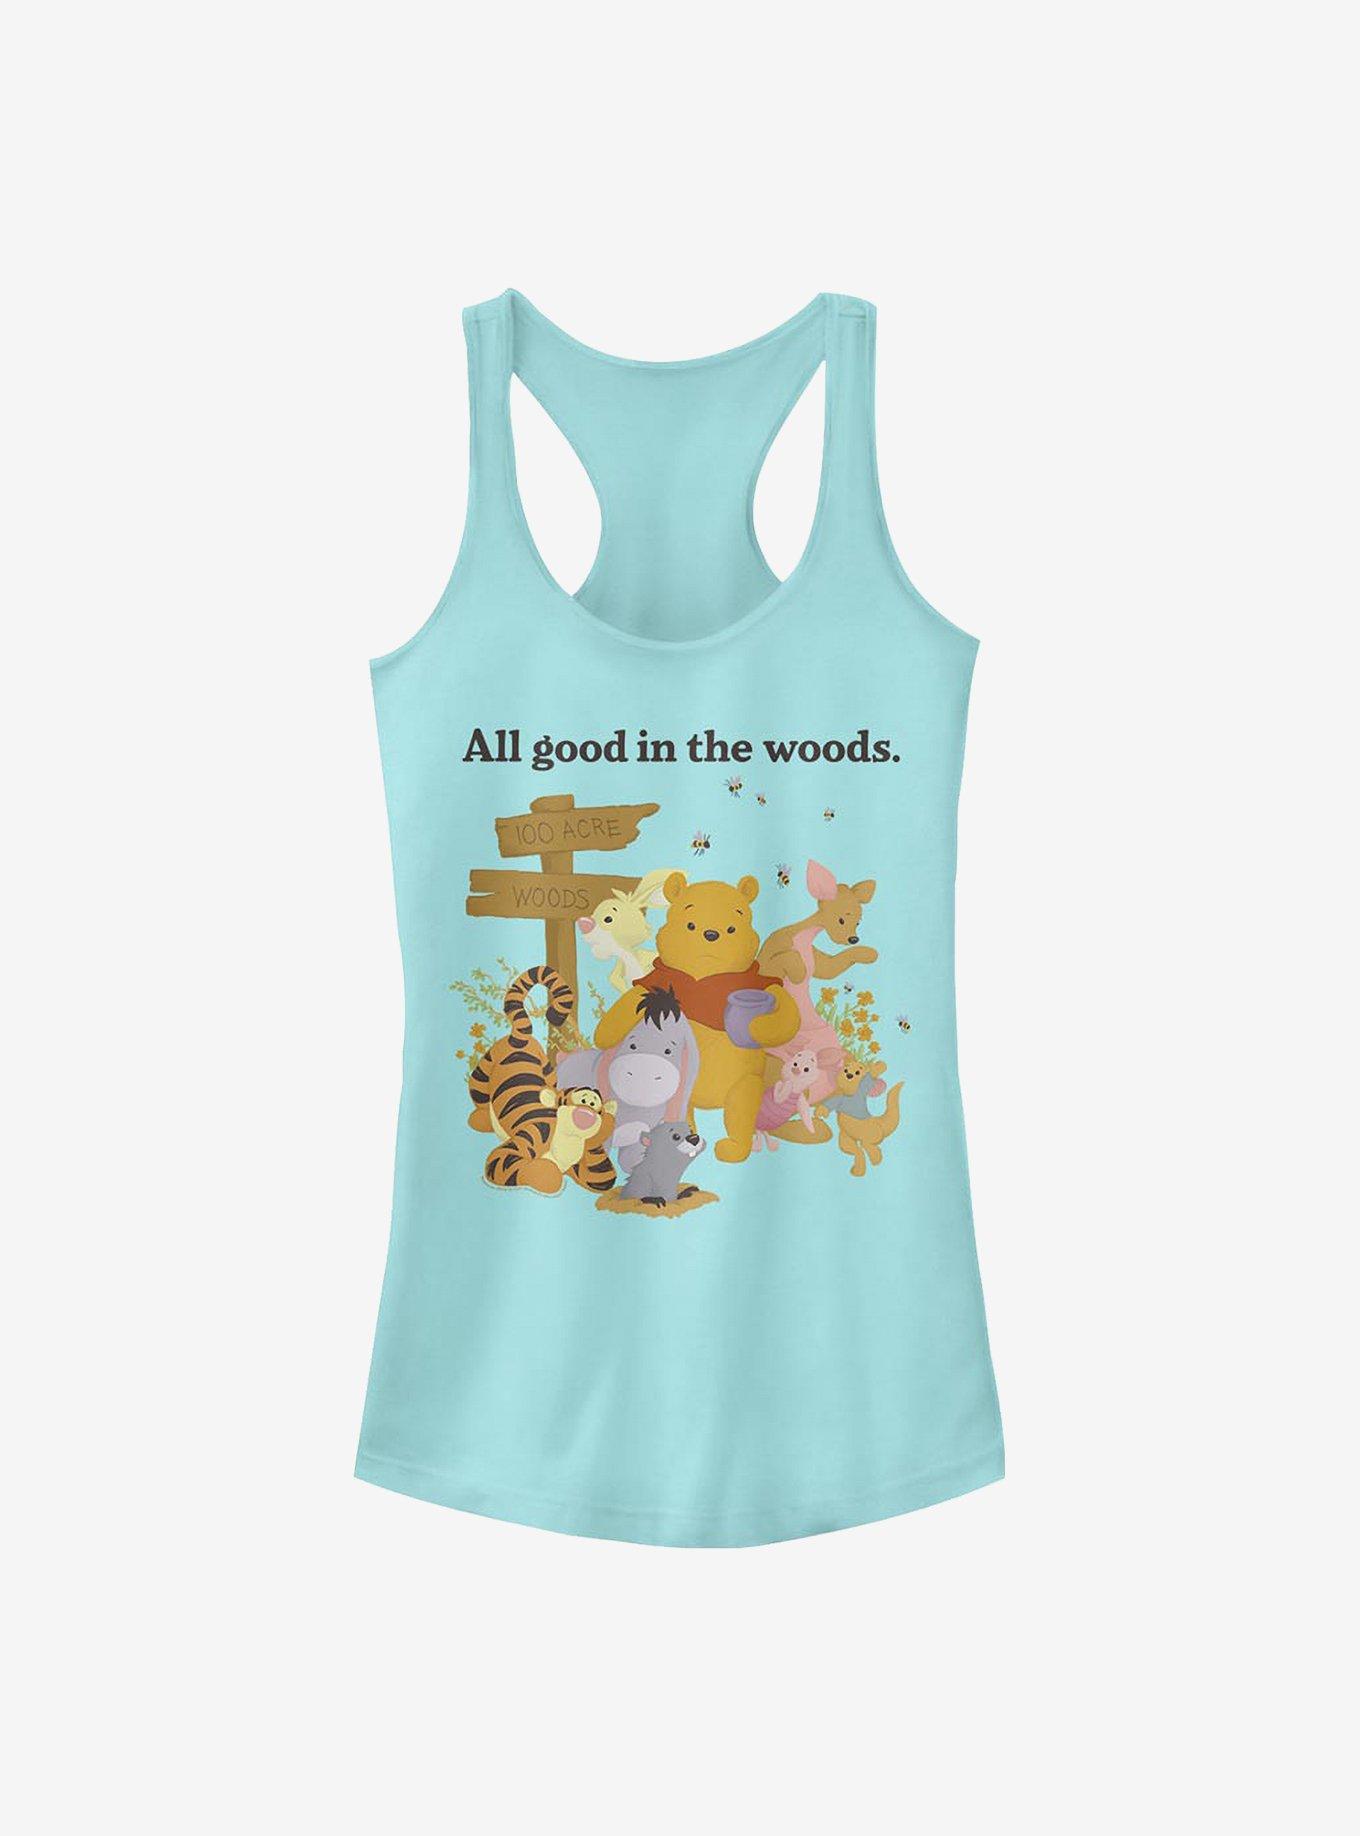 Disney Winnie The Pooh In The Woods Girls Tank Top, CANCUN, hi-res